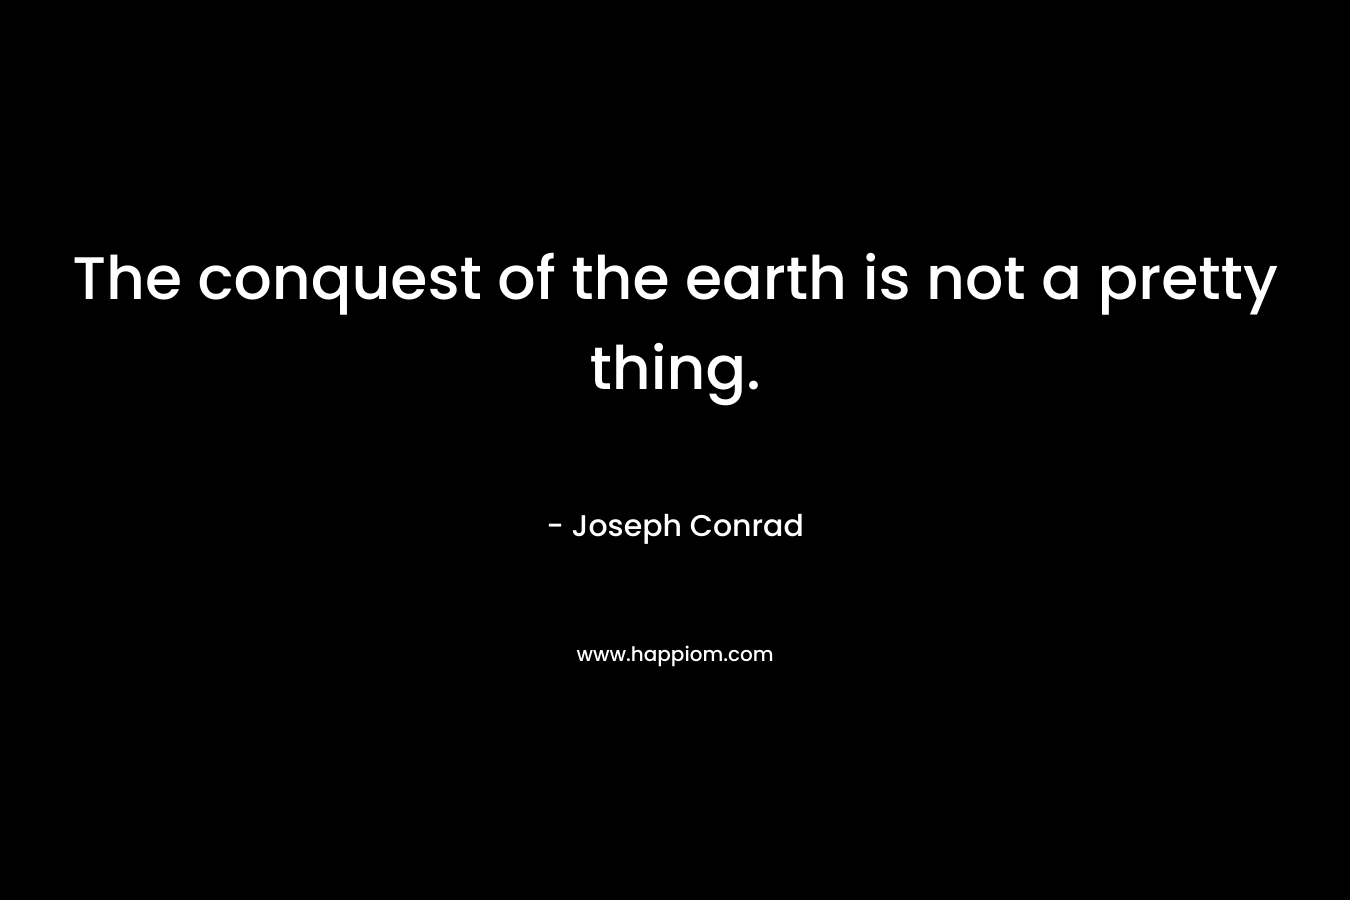 The conquest of the earth is not a pretty thing. – Joseph Conrad